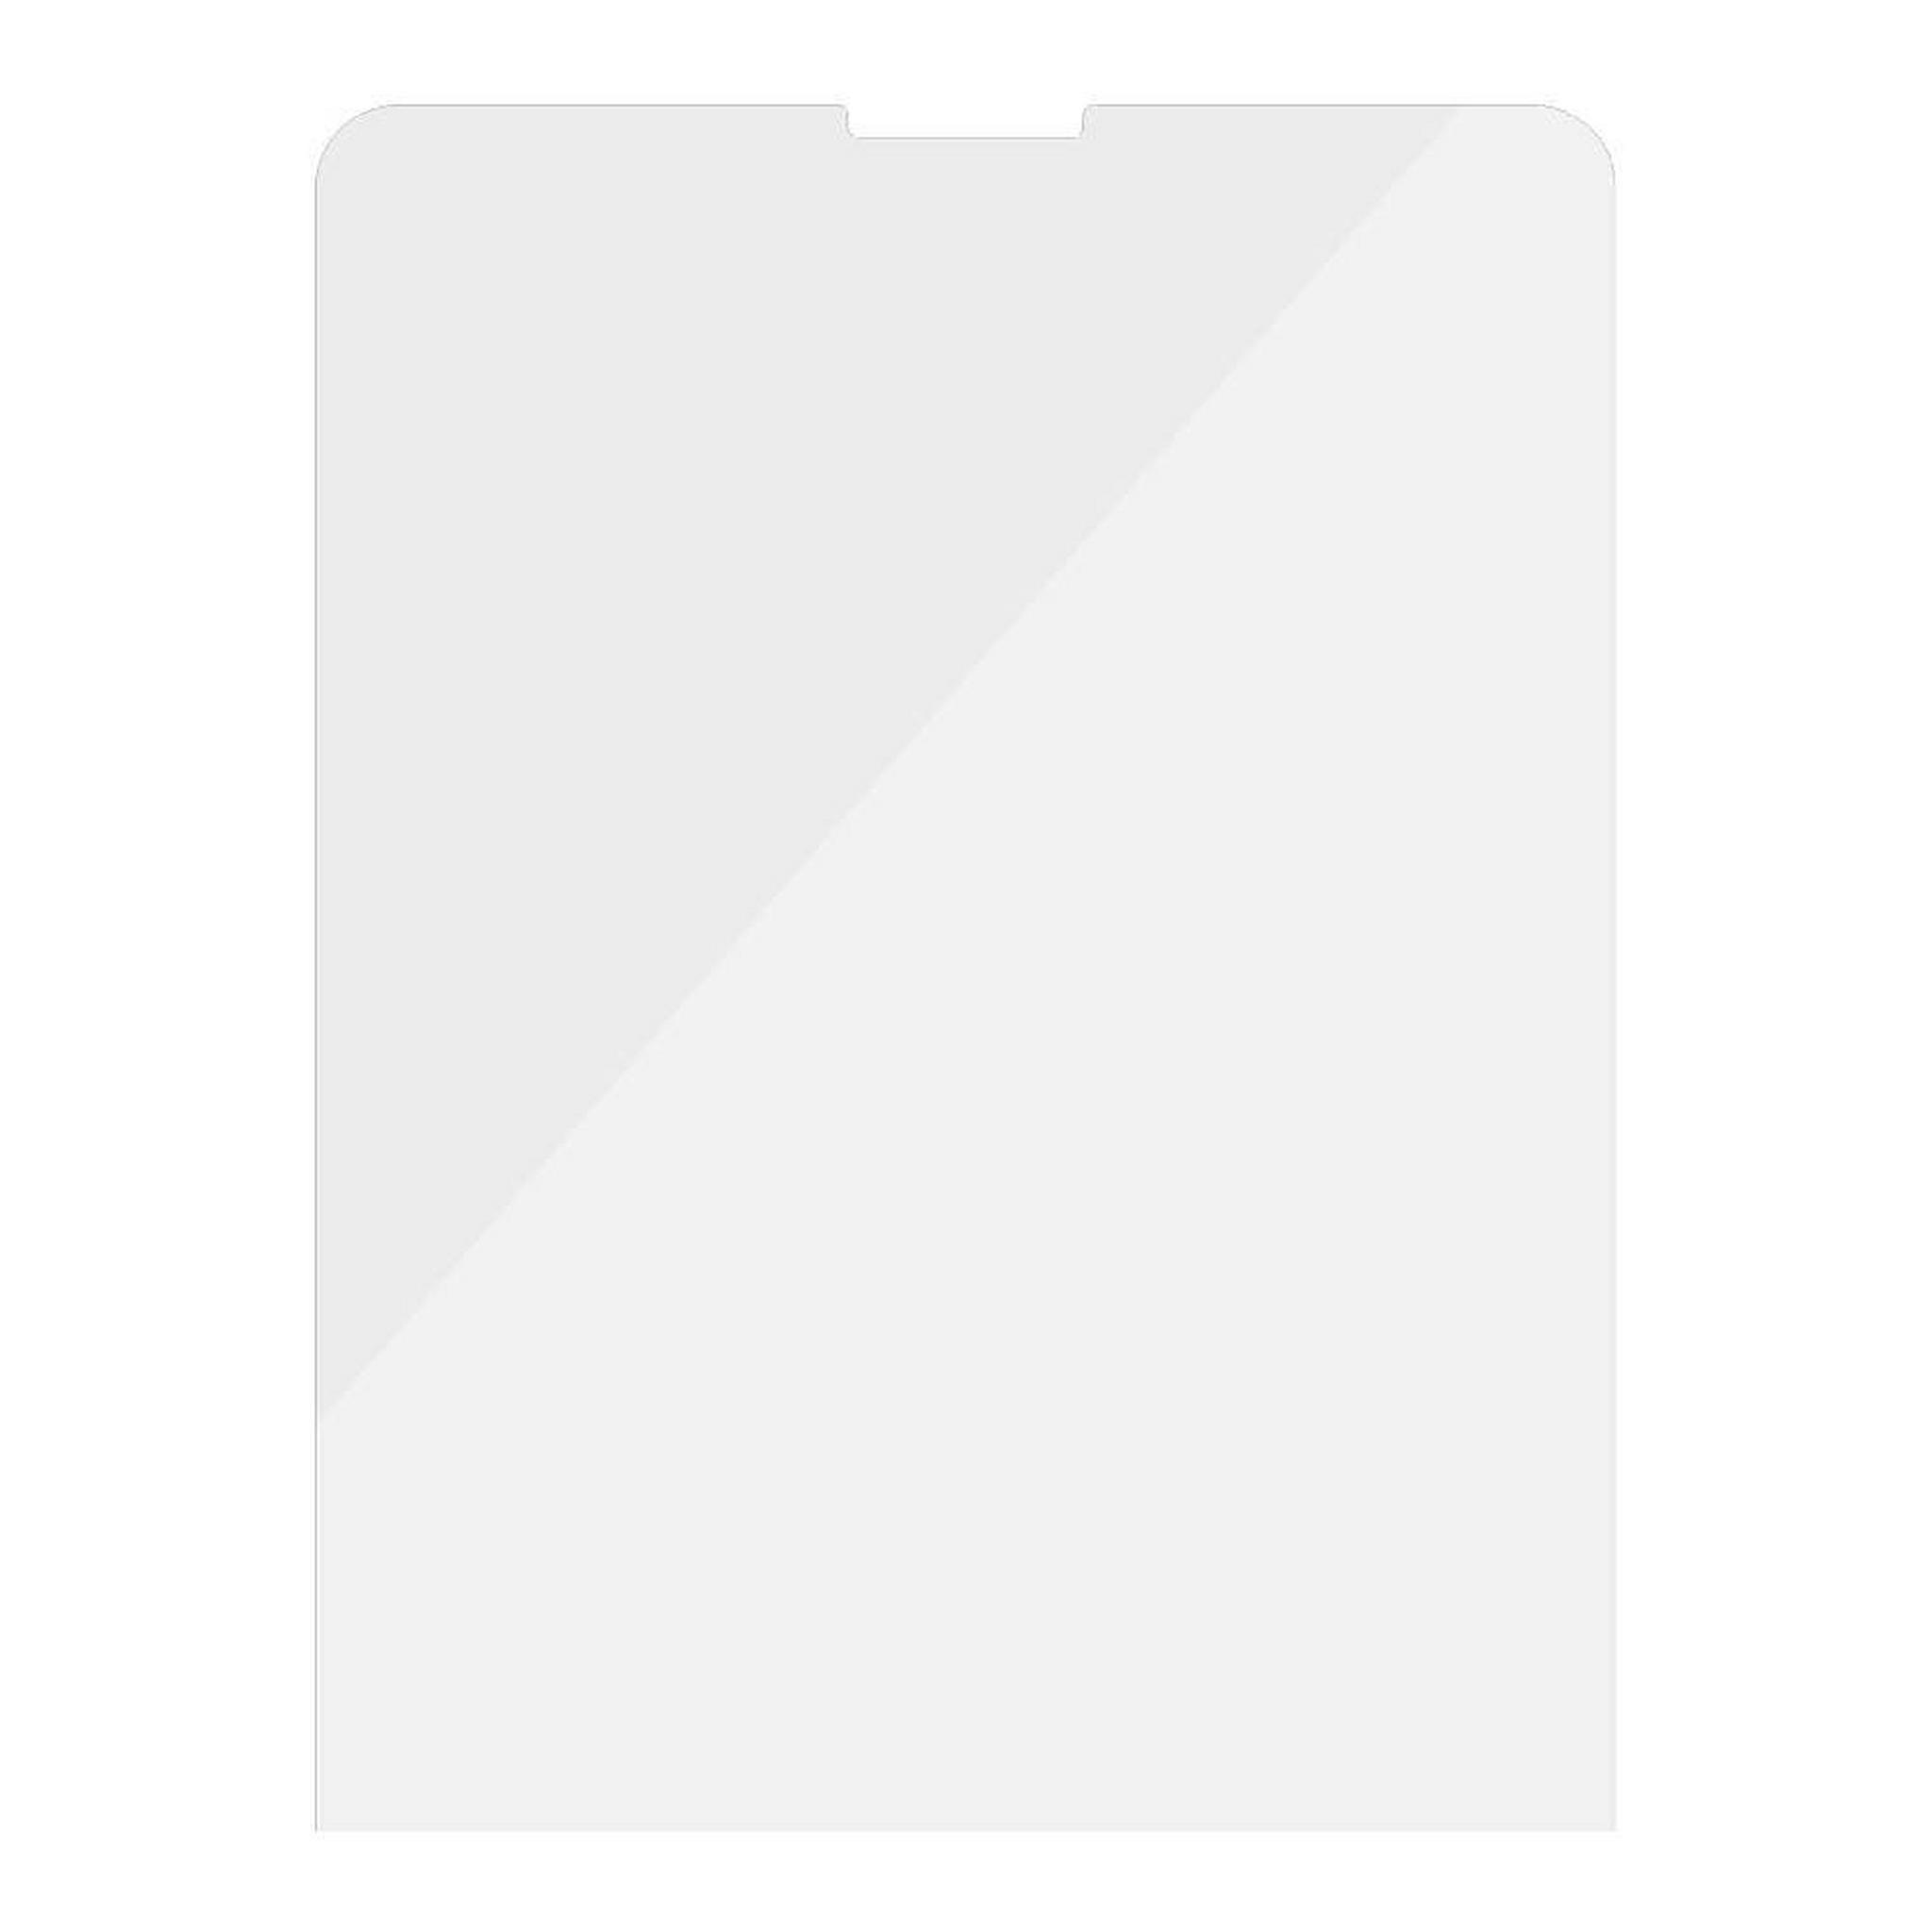 Panzer Glass Screen Protector For Apple iPad Pro 11-inch